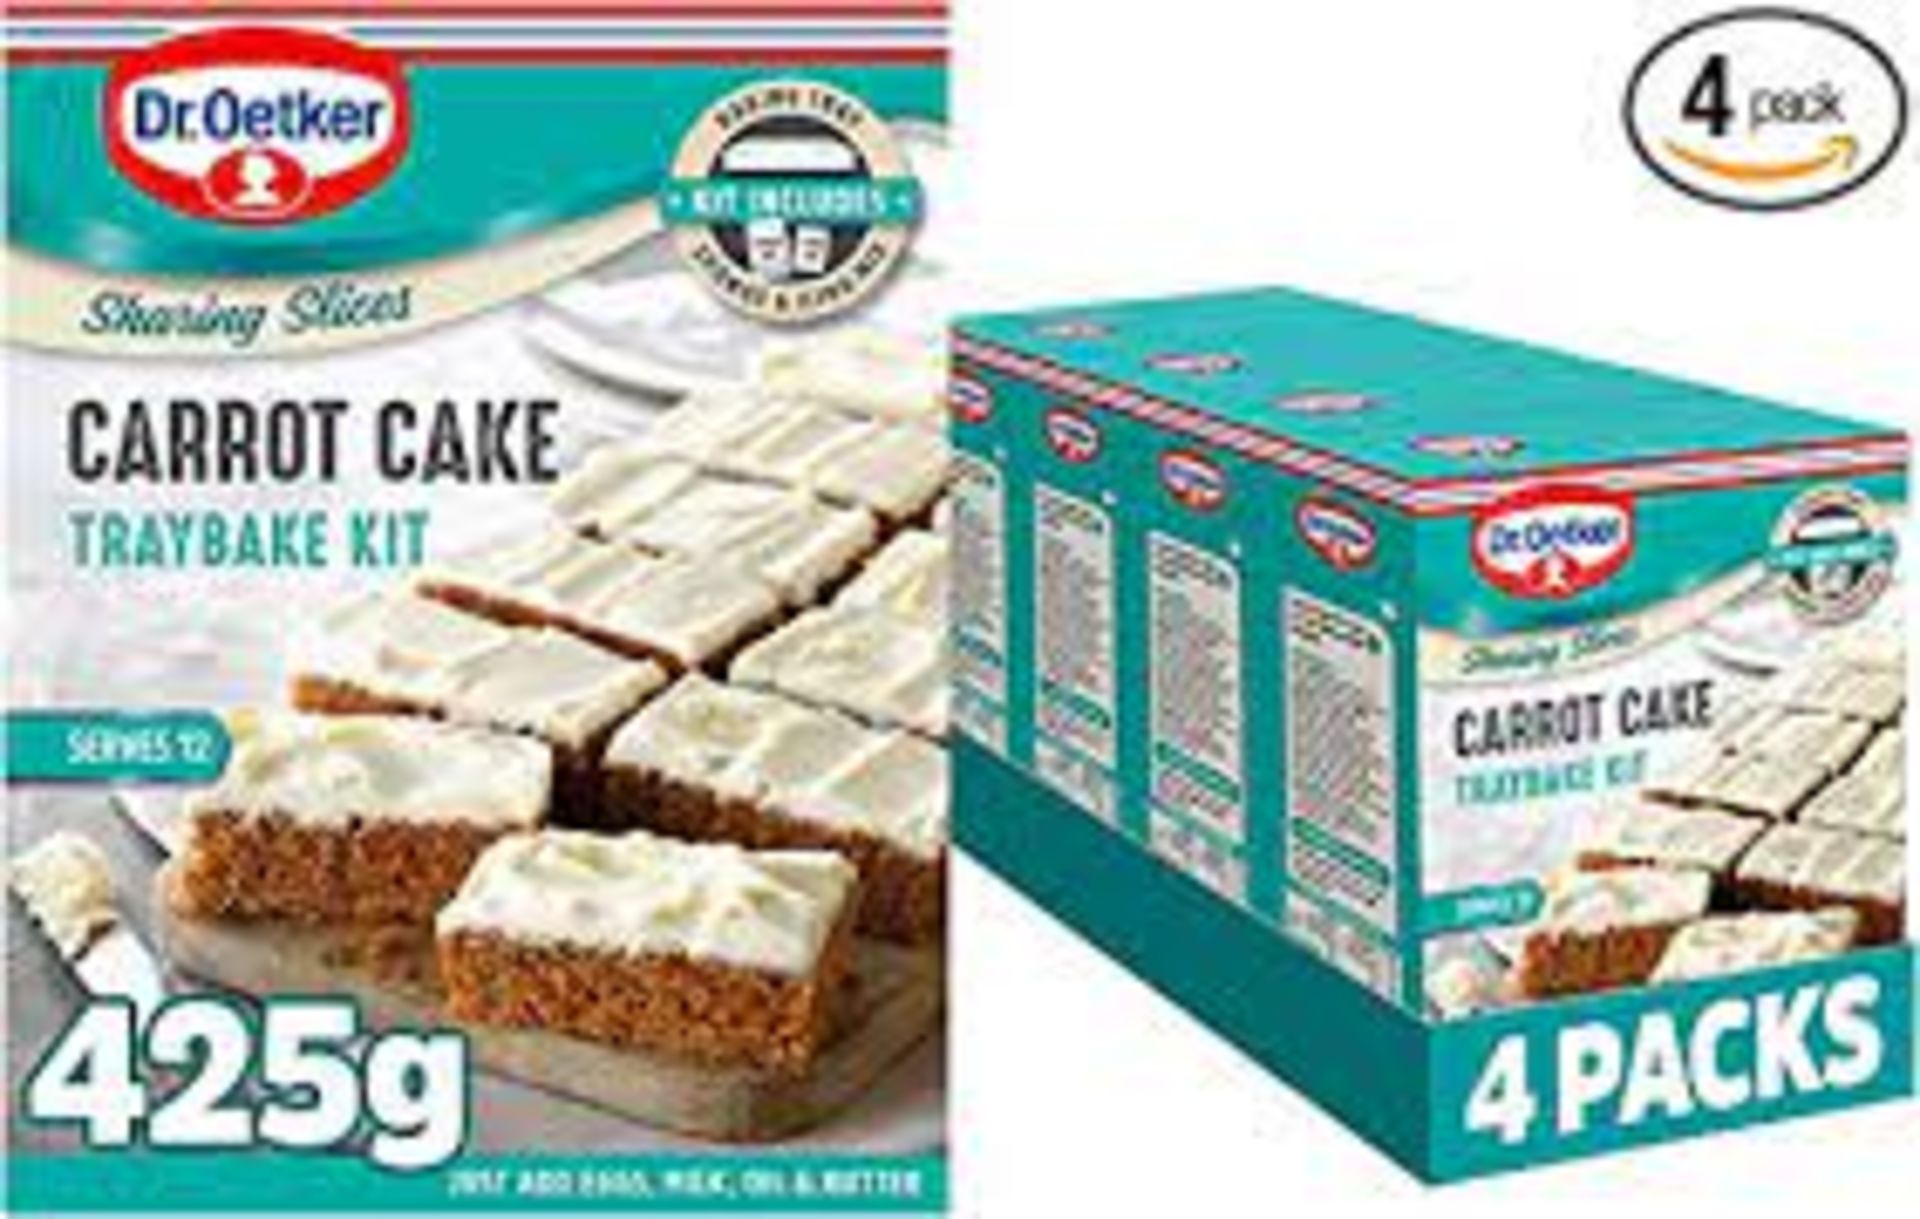 RRP £493 (Approx. Count 43) spW44f1217F 15 x Dr. Oetker Carrot Cake Traybake Kit 425 g, Pack of 4  2